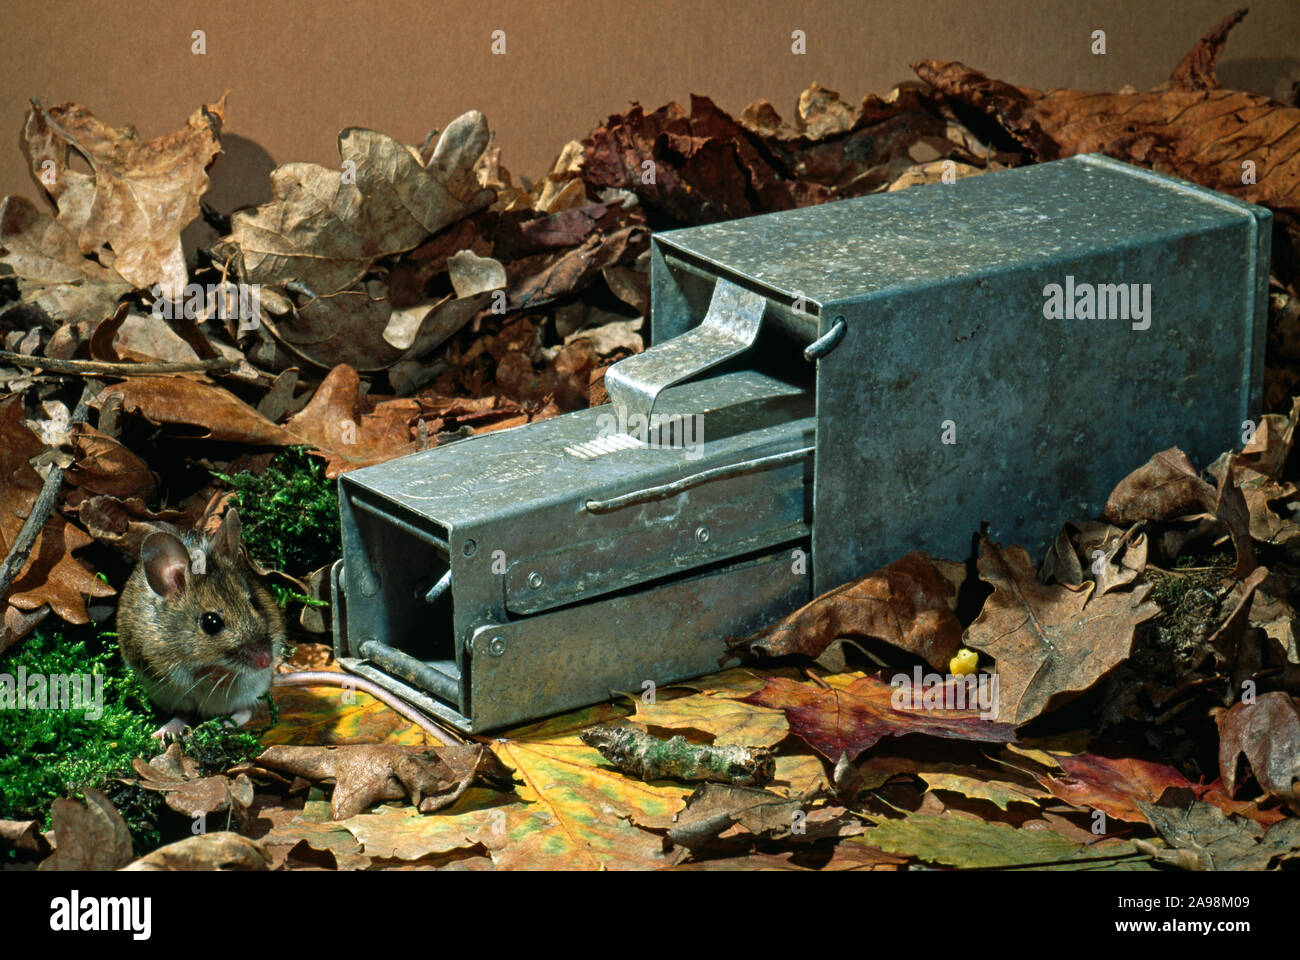 https://c8.alamy.com/comp/2A98M09/wood-mouse-or-long-tailed-field-mouse-apodemus-sylvaticus-longworth-small-mammal-trap-safely-catching-living-small-mammals-particularly-rodents-2A98M09.jpg